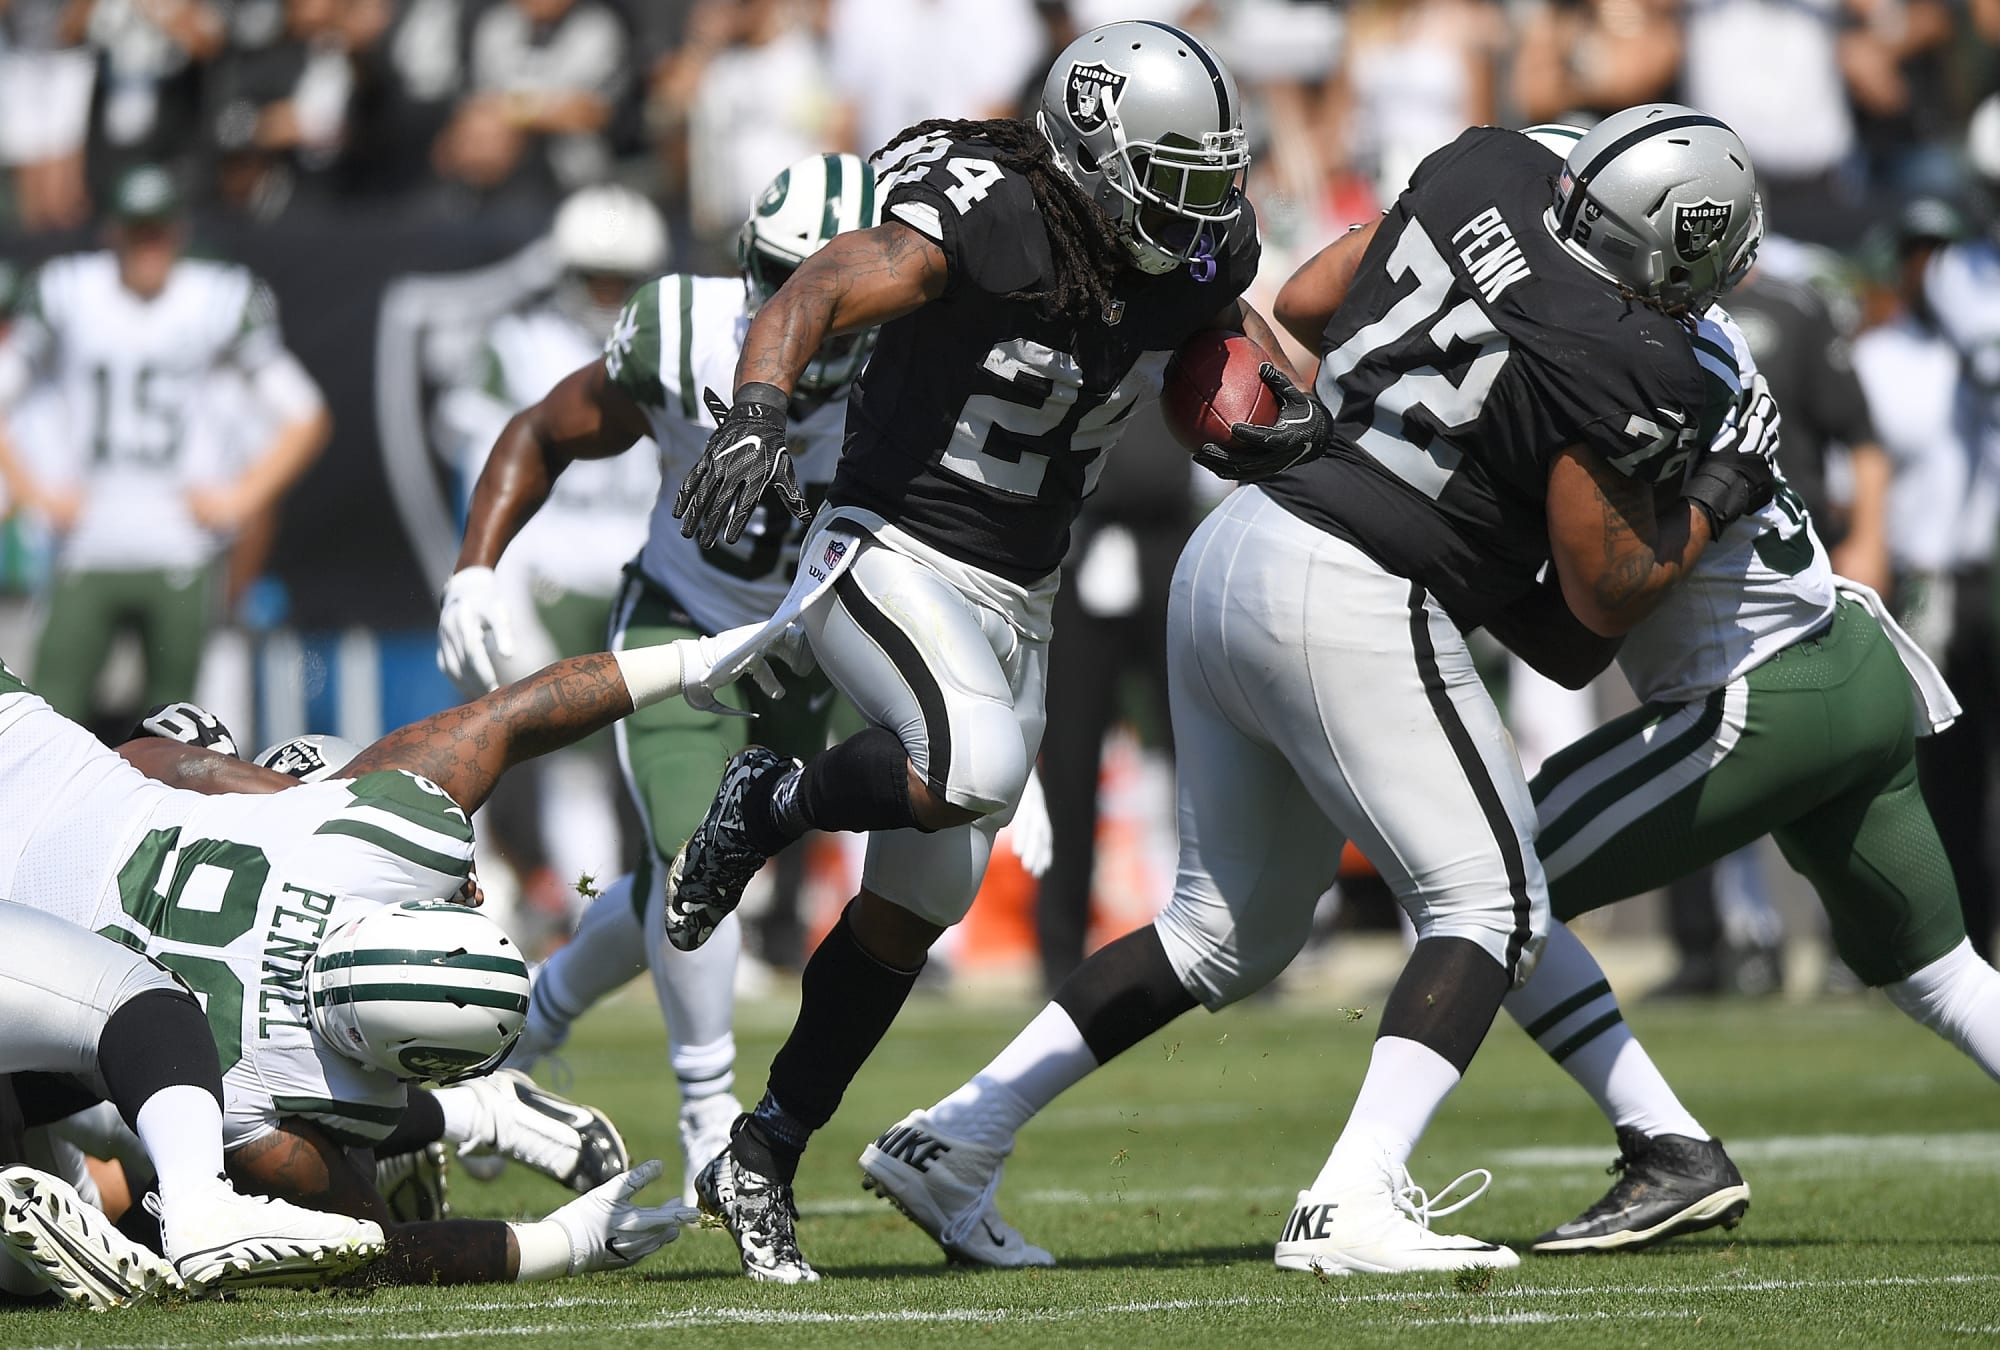 Jets vs. Raiders Highlights, game tracker and more